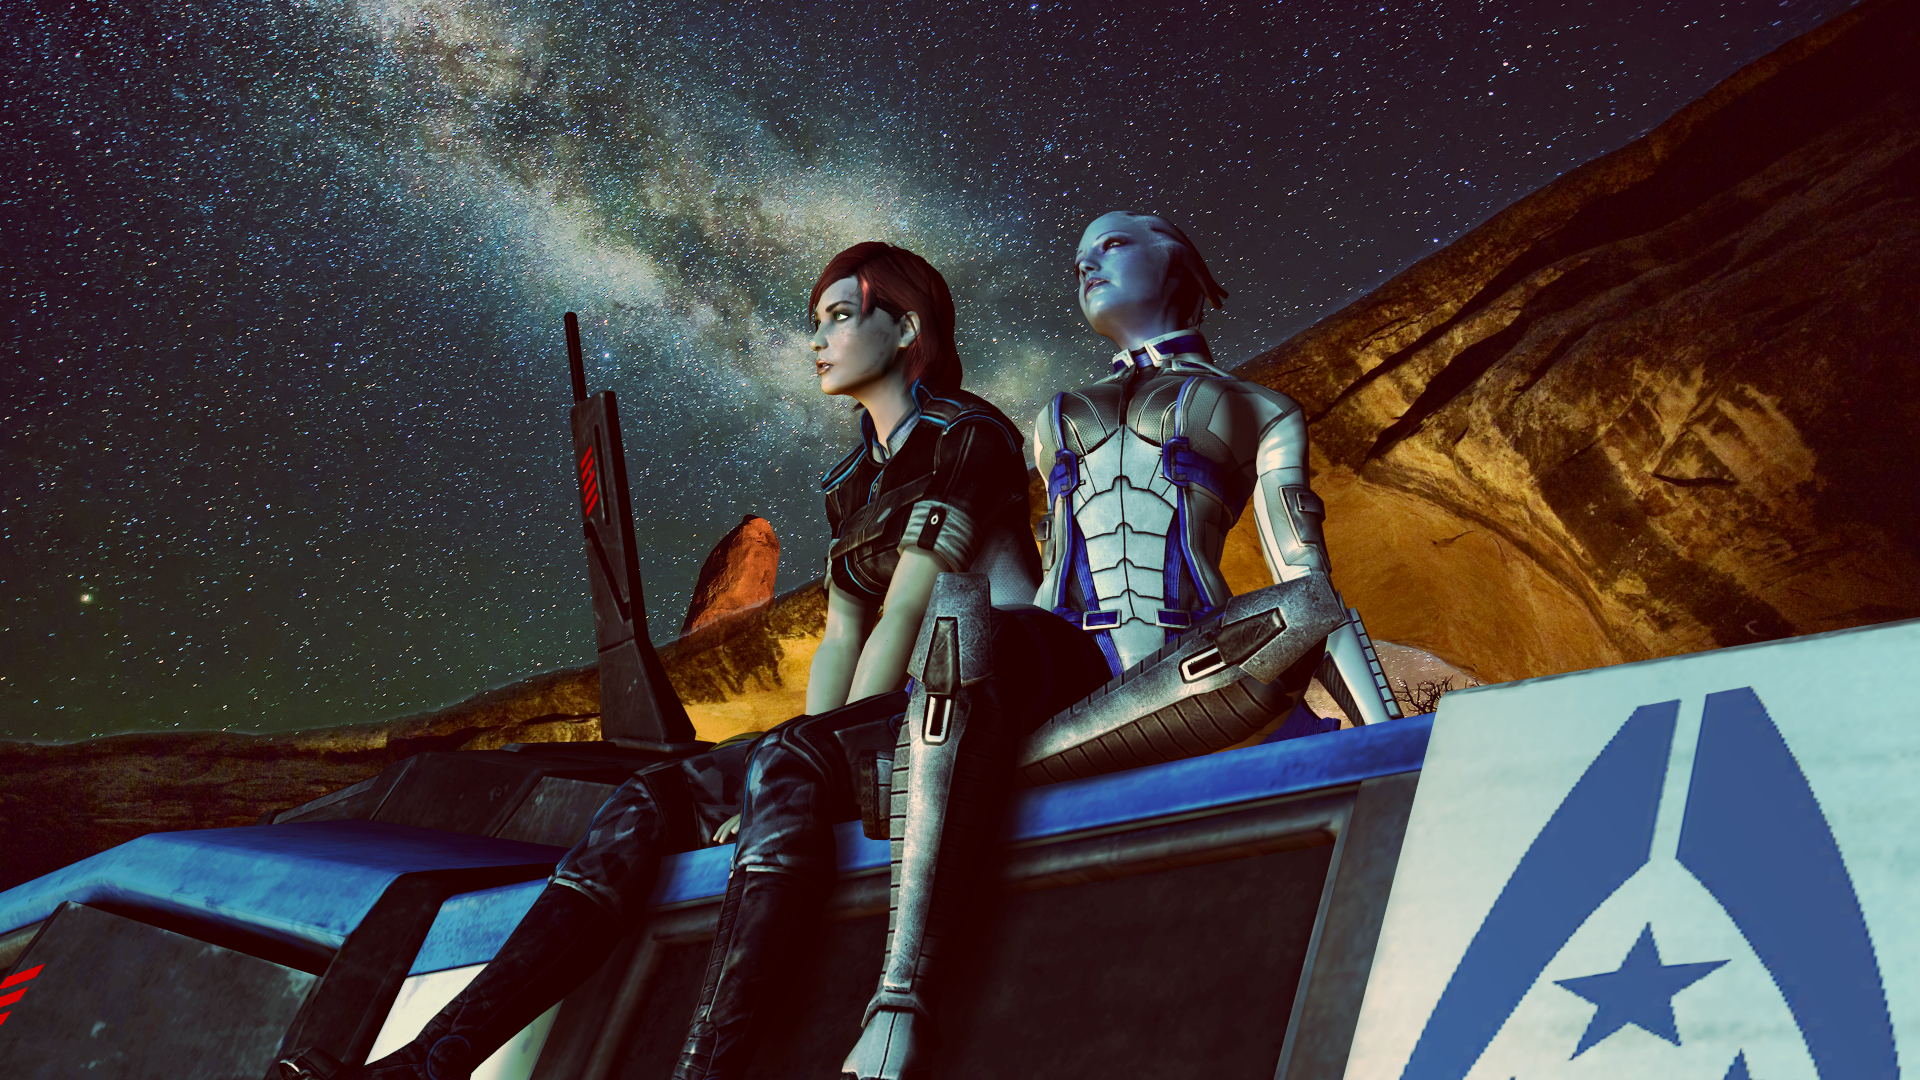 Mass Effect Video Games Video Game Art Video Game Heroes Night Sky Science Fiction Video Game Girls  1920x1080